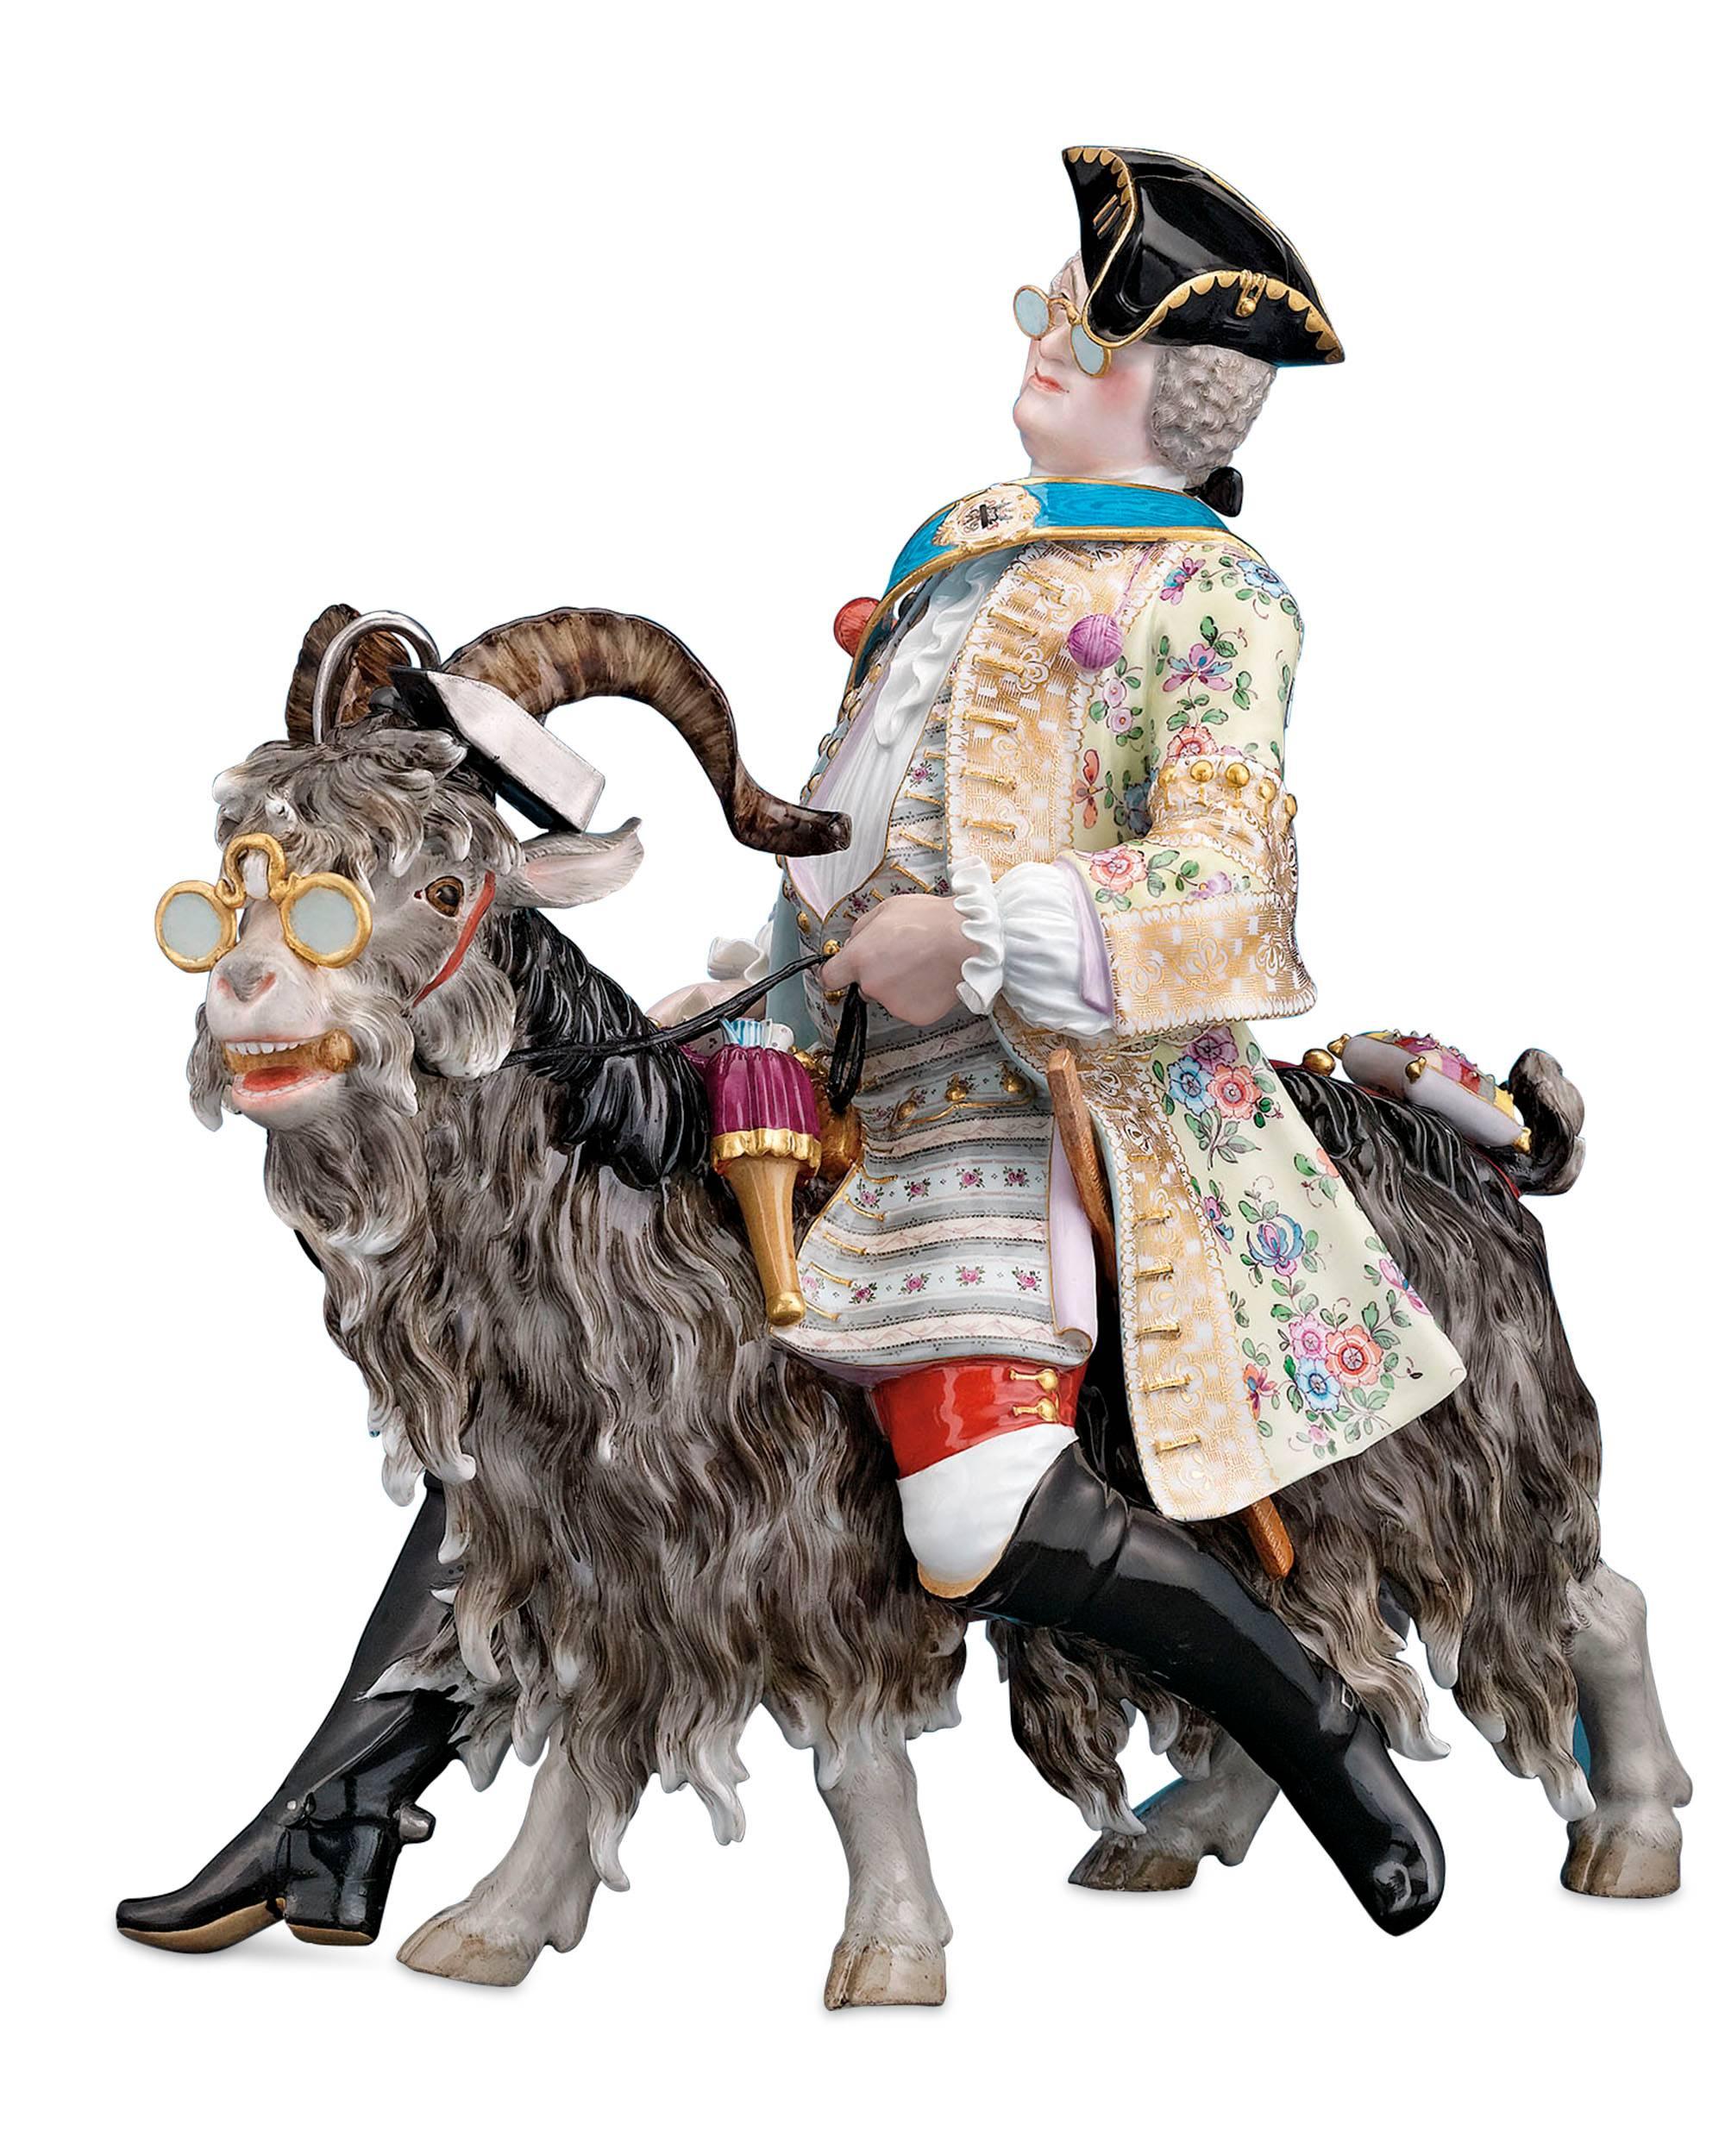 One of Meissen’s more curious pieces, this delightful porcelain statue is entitled “Count Brühl’s Tailor on a Goat,” and is considered by most experts to be one of Meissen's greatest works. Modeled after a design by Johann-Joachim Kaendler